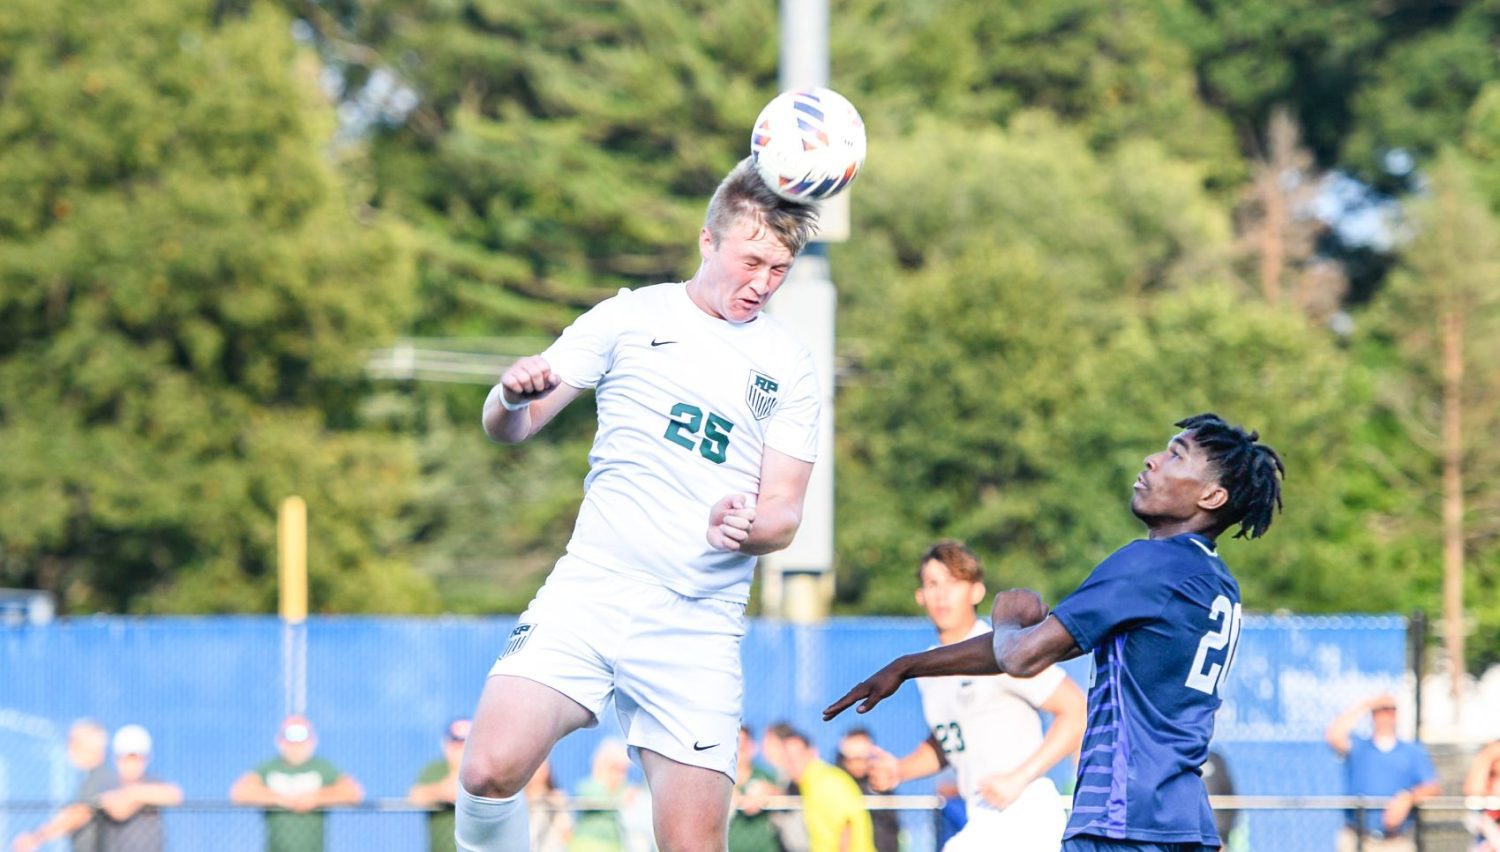 Reeths-Puffer soccer captures Causeway Cup, shuts out rival Mona Shores